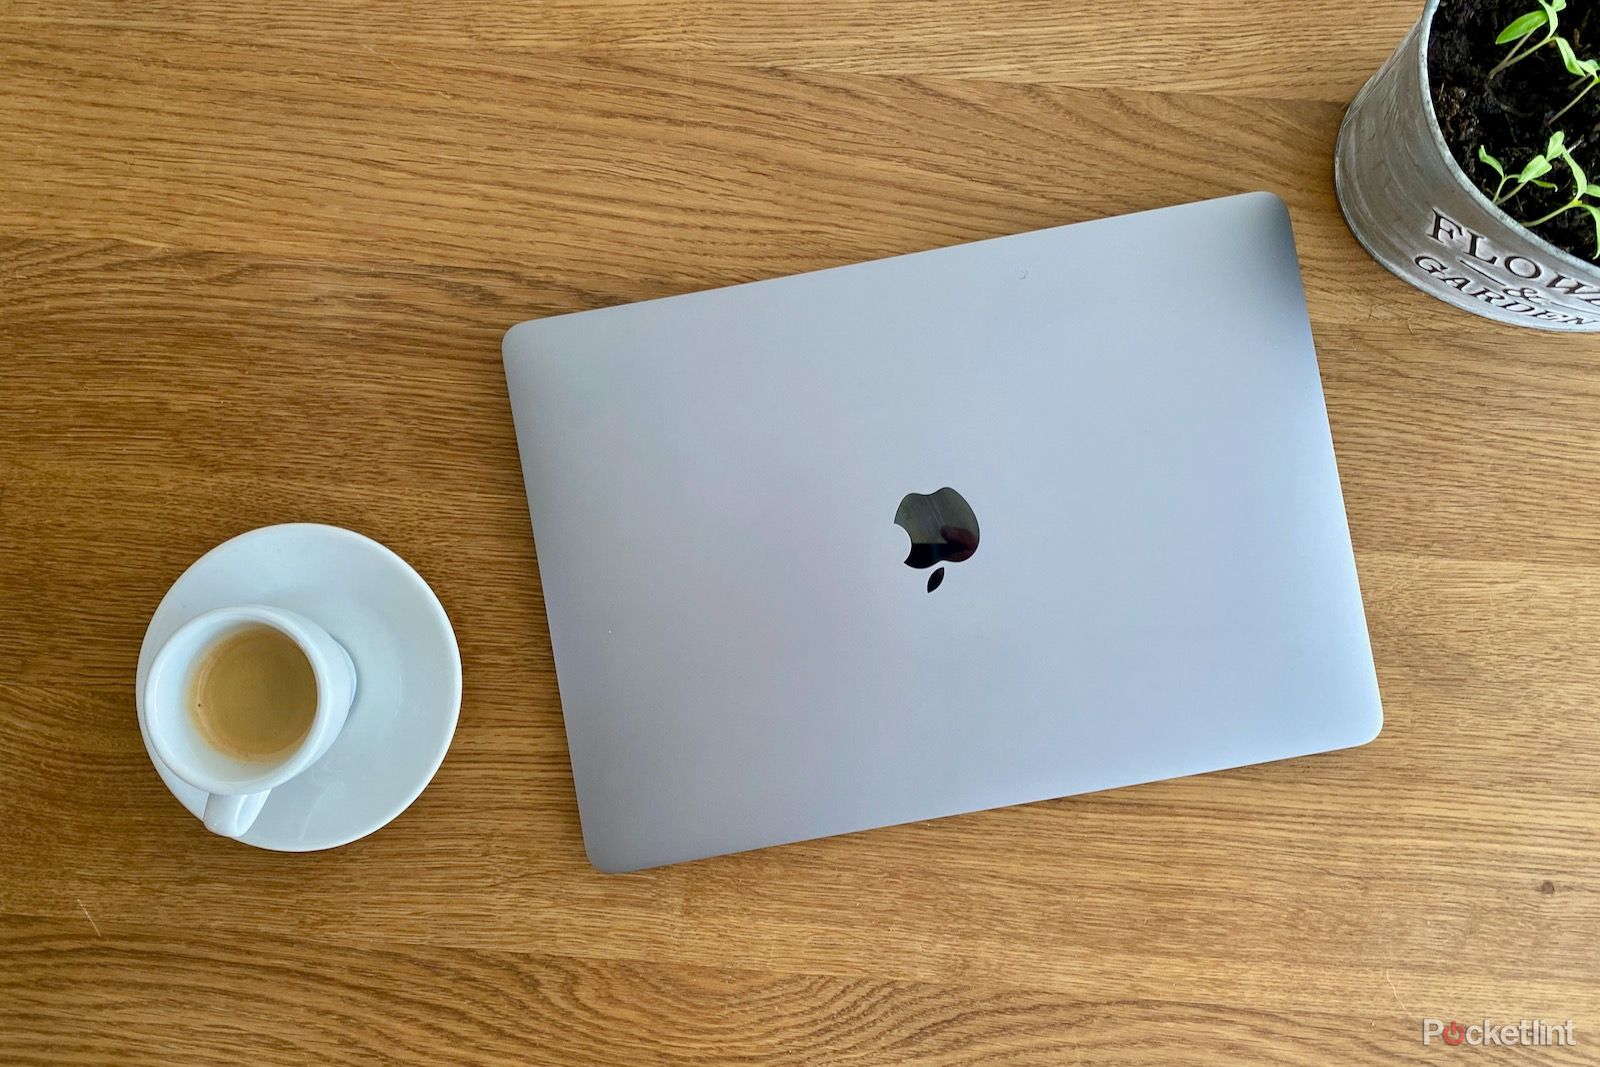 How to forget a wireless network on Mac